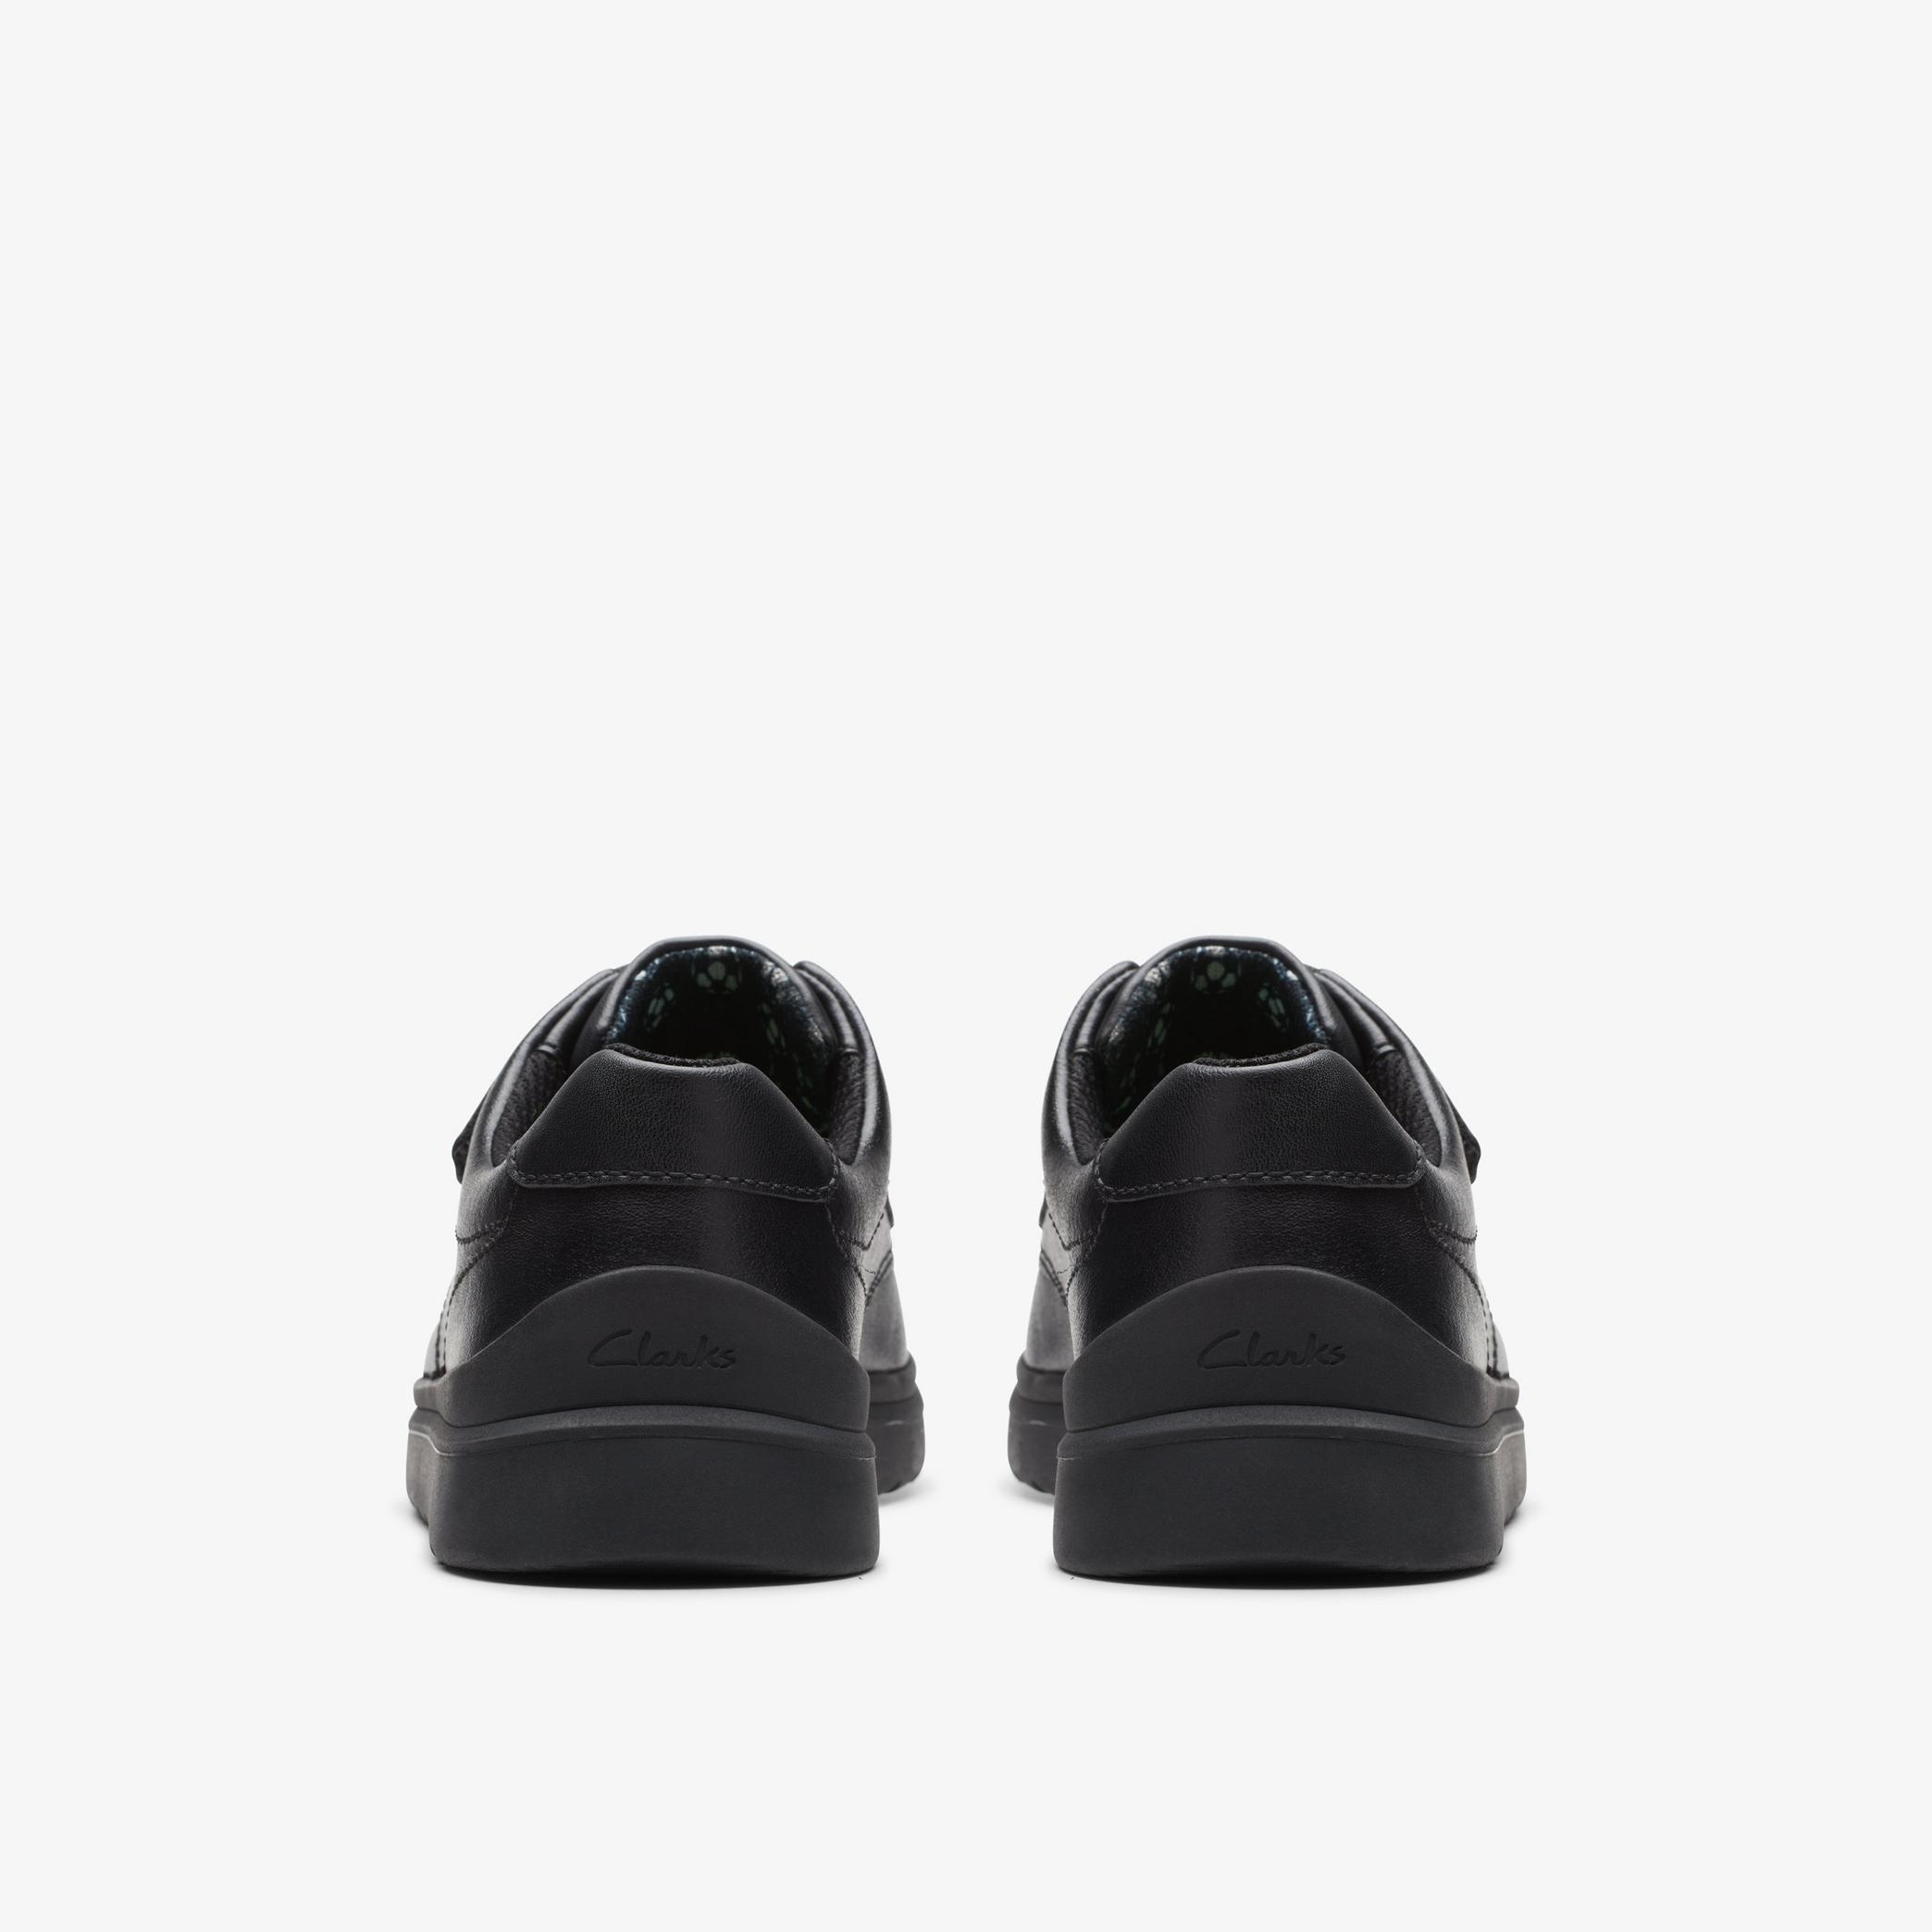 Goal Style Kid Black Leather Shoes, view 5 of 6